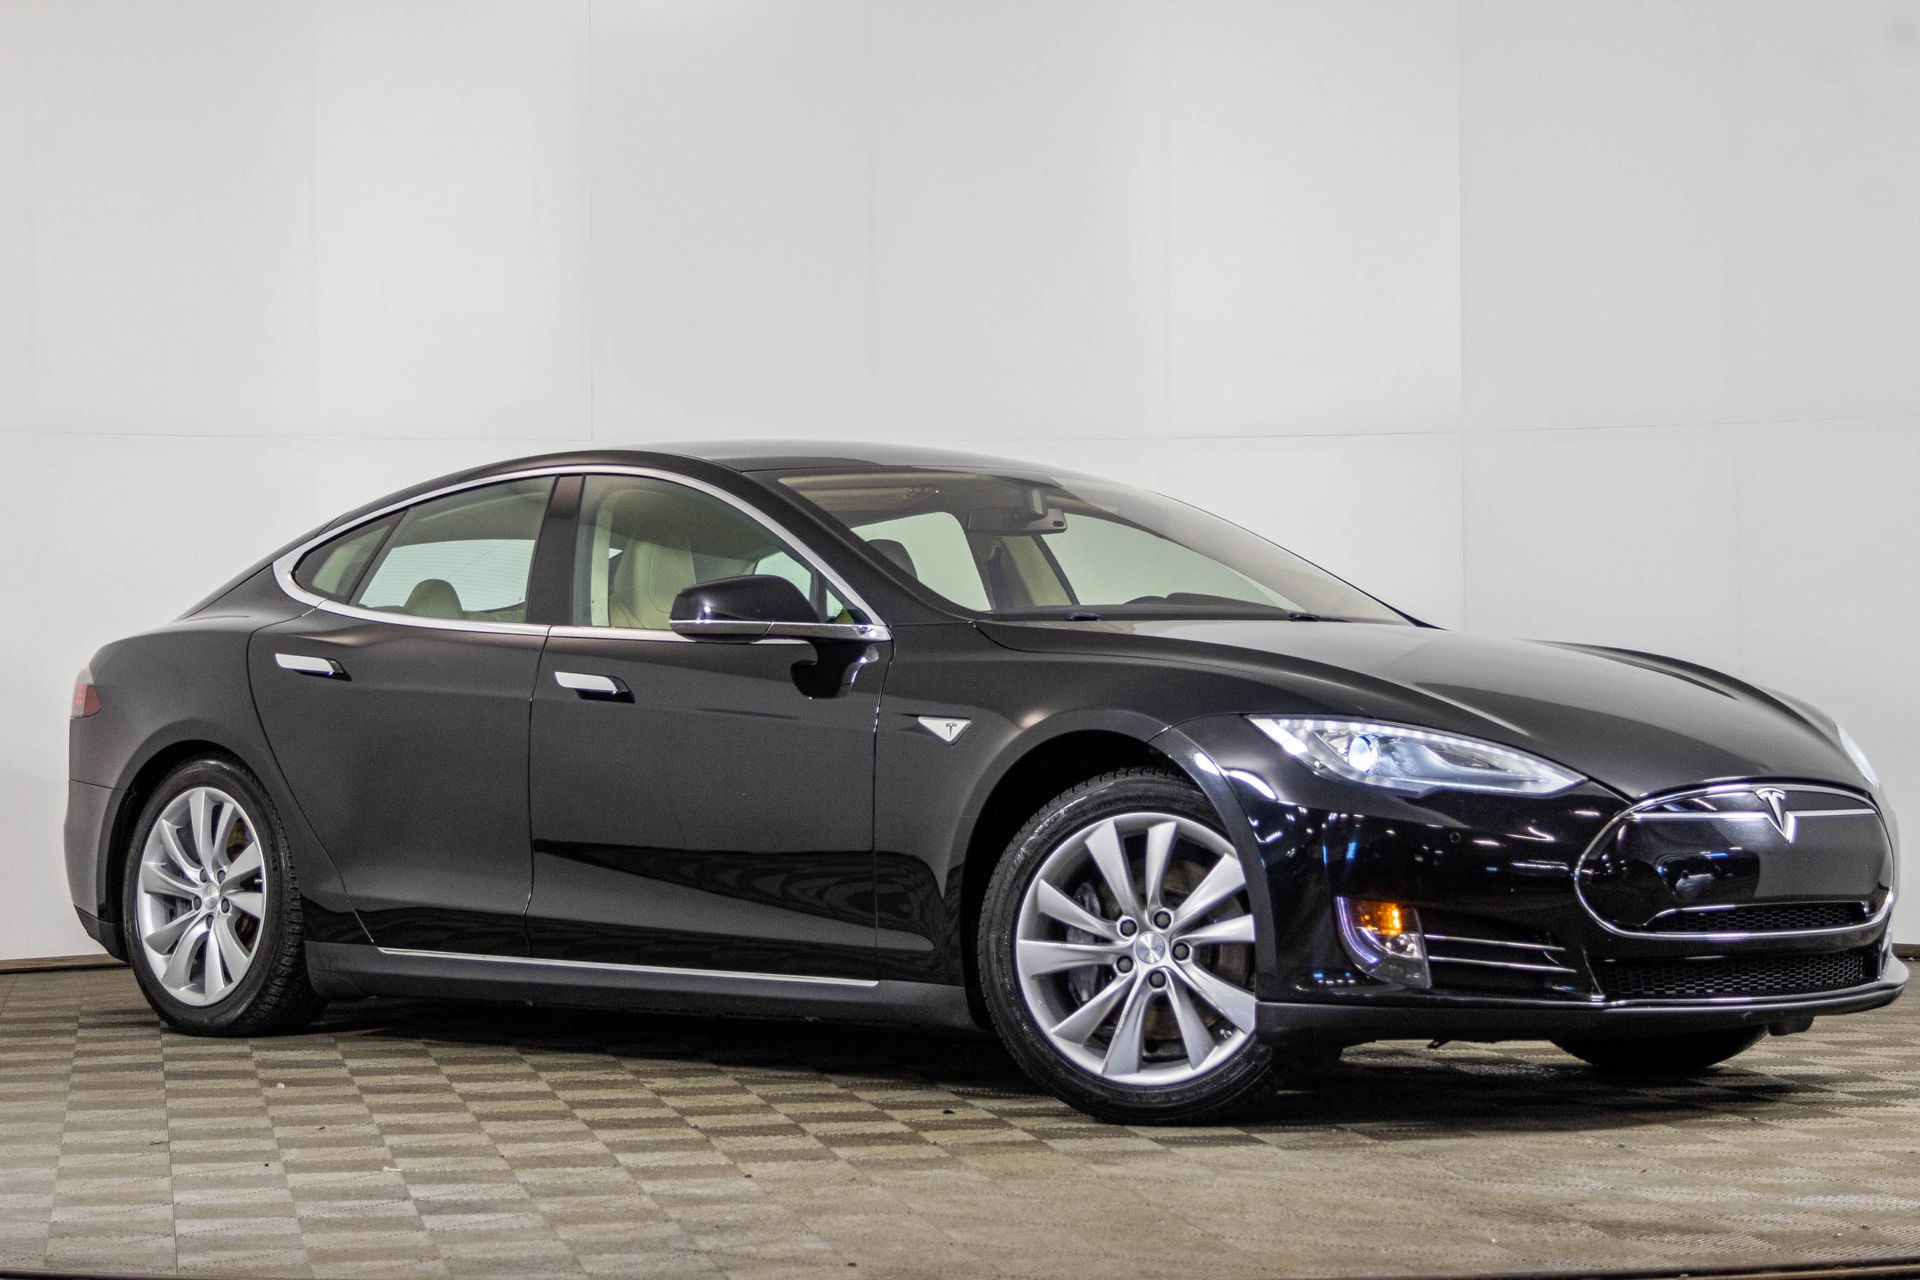 Used 2014 Tesla Model S S with VIN 5YJSA1H10EFP32209 for sale in Michigan City, IN